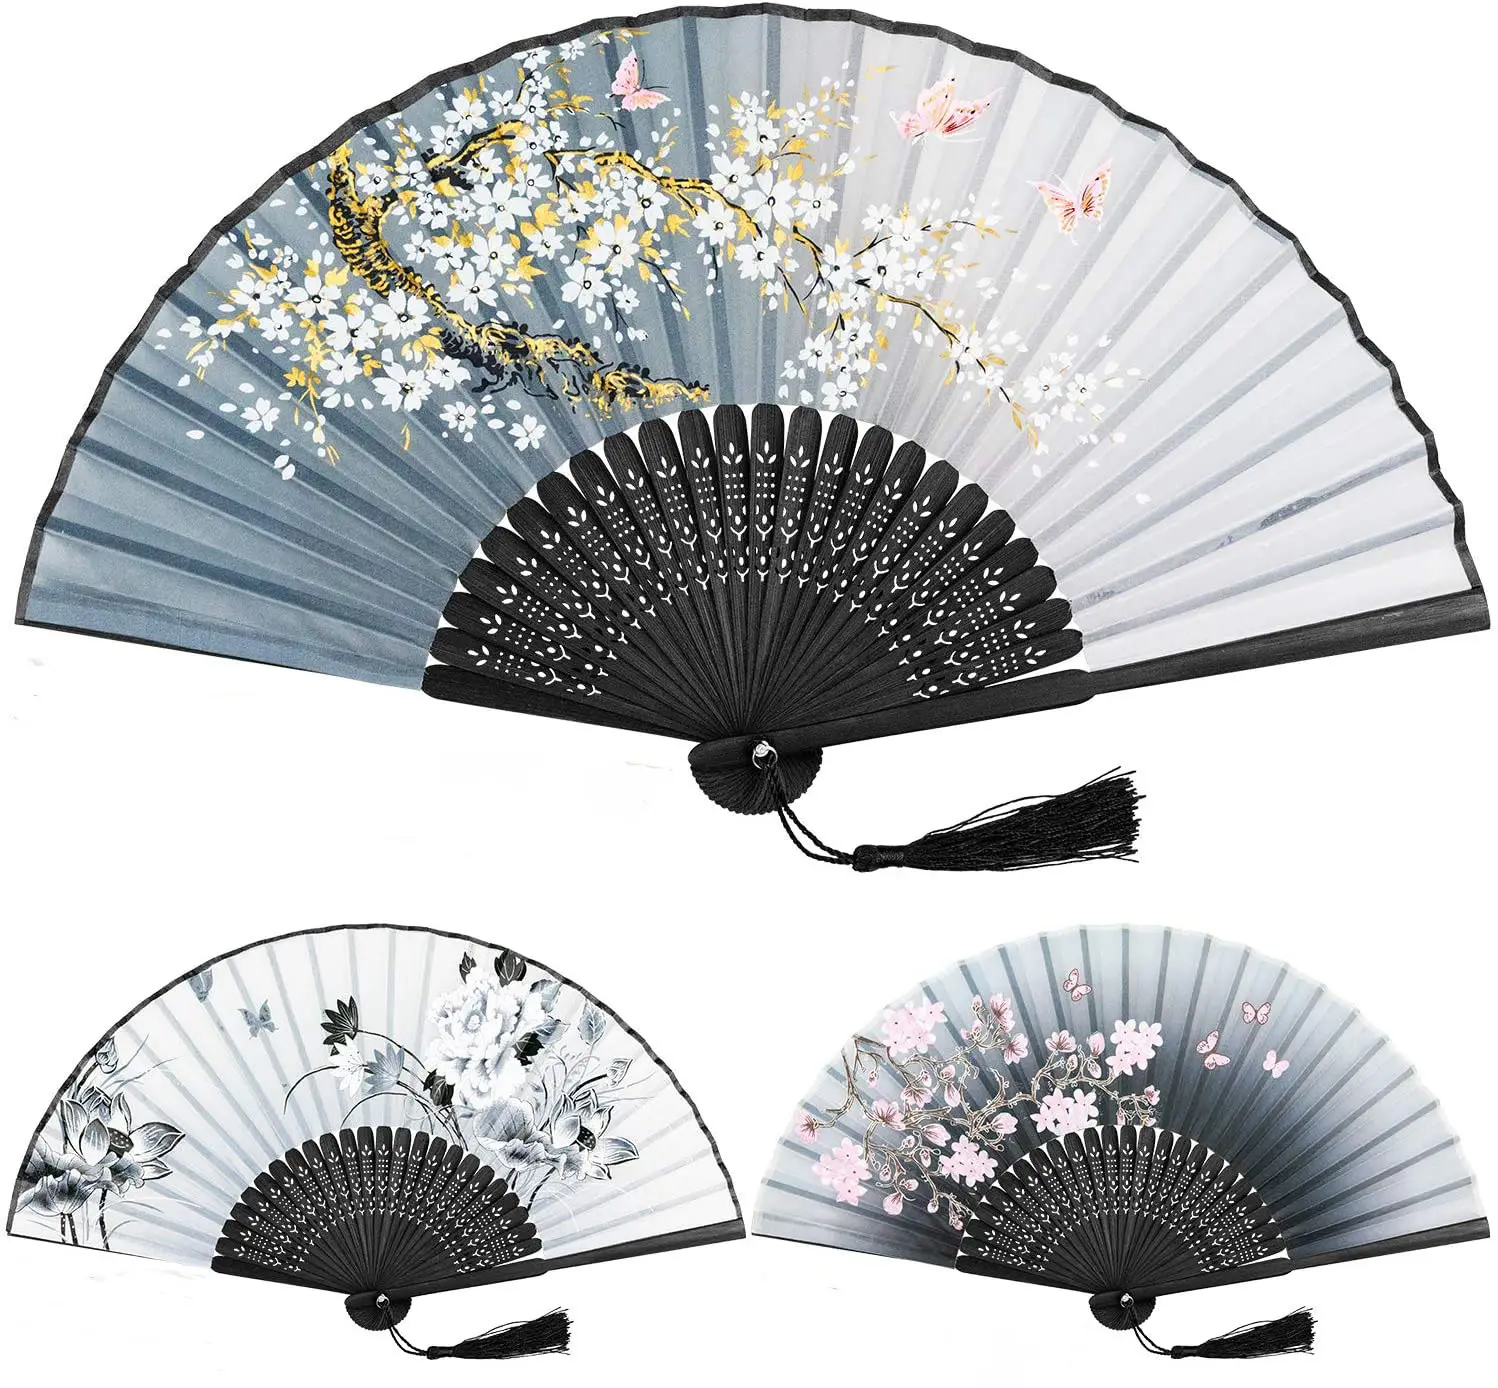 Hand Folding Fan, Abanicos de Mano Chinese Vintage Style Handheld Fan with Fabric Sleeve, Silk Fan with Bamboo Frame and Elegant